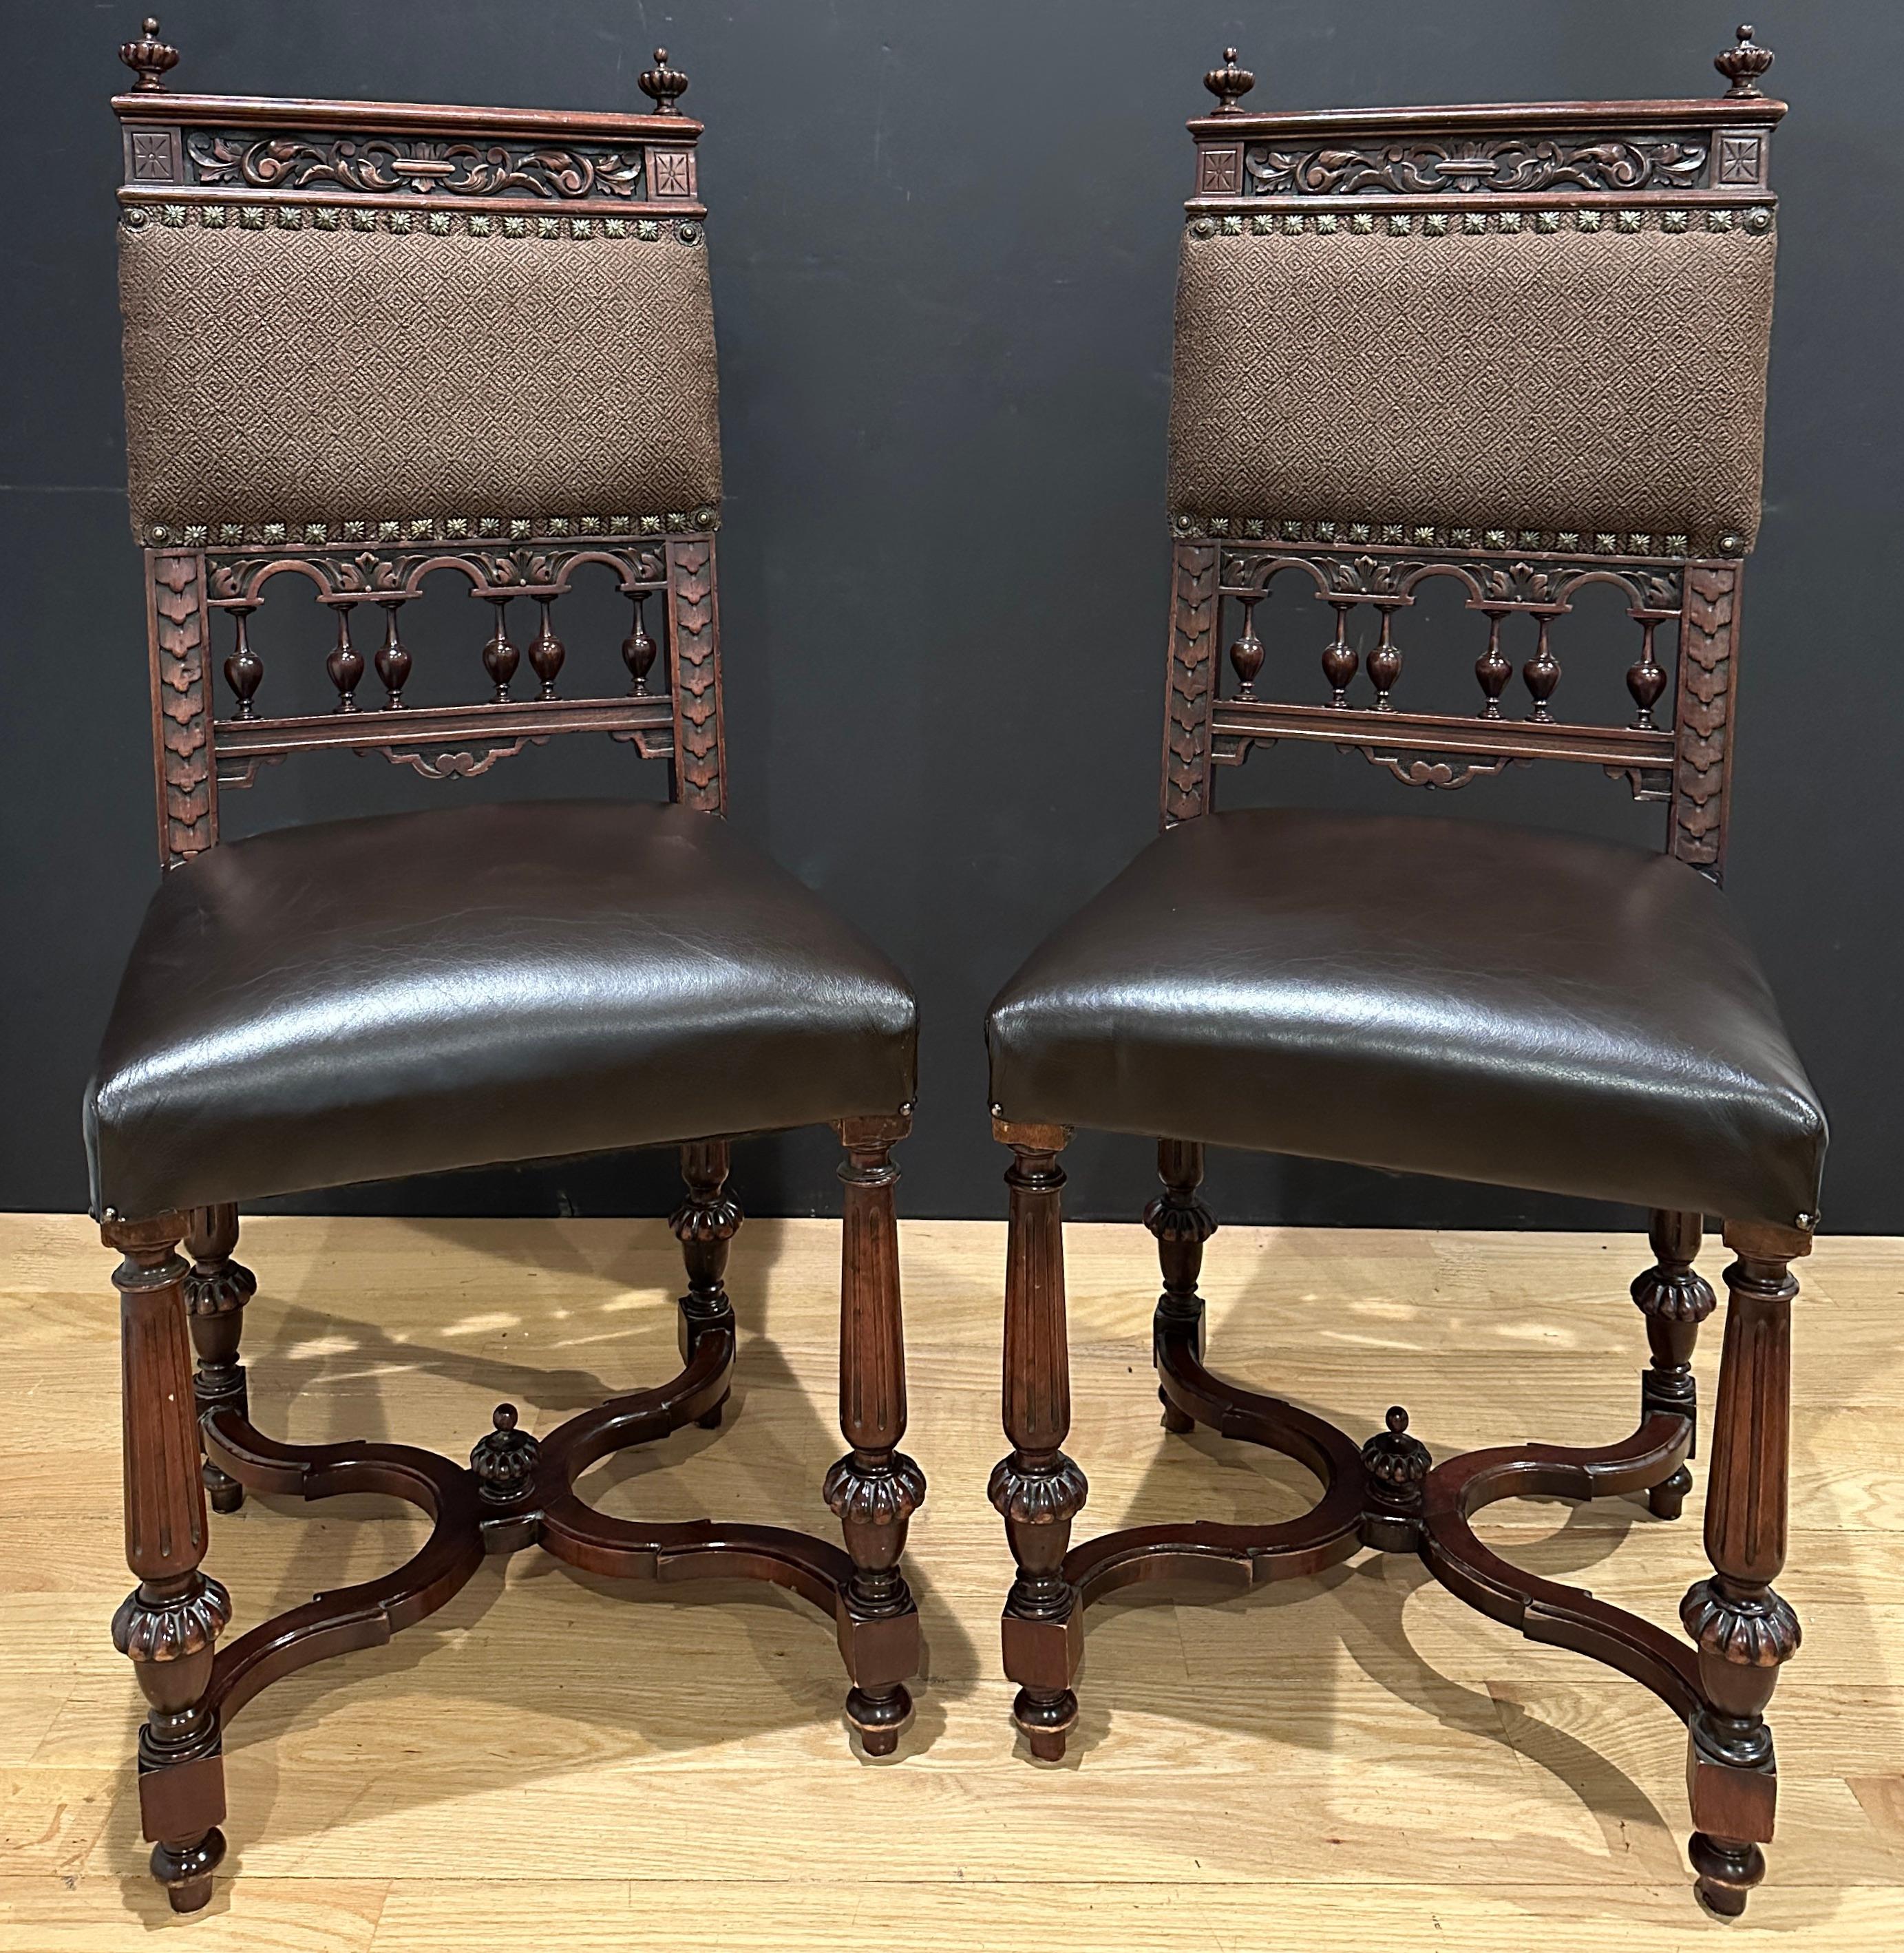 Pair of fine quality 19th century carved walnut, leather and fabric upholstered side chairs. Square brass nailheads adorn the top upholstery. X form cross stretcher.